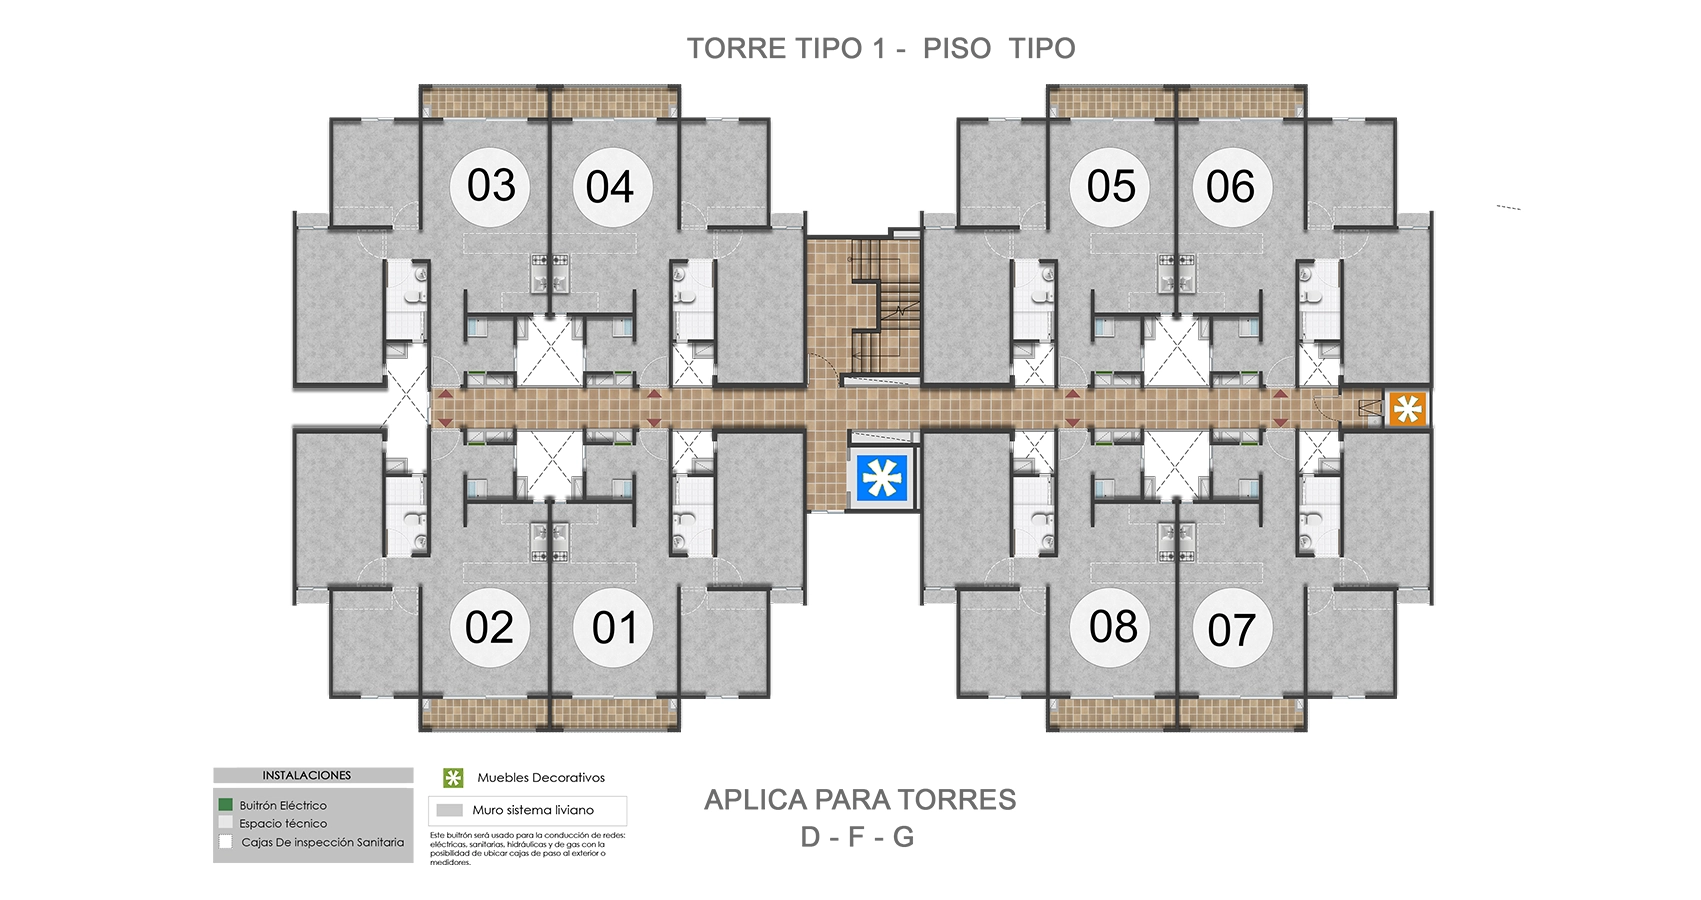 Torre tipo 1 